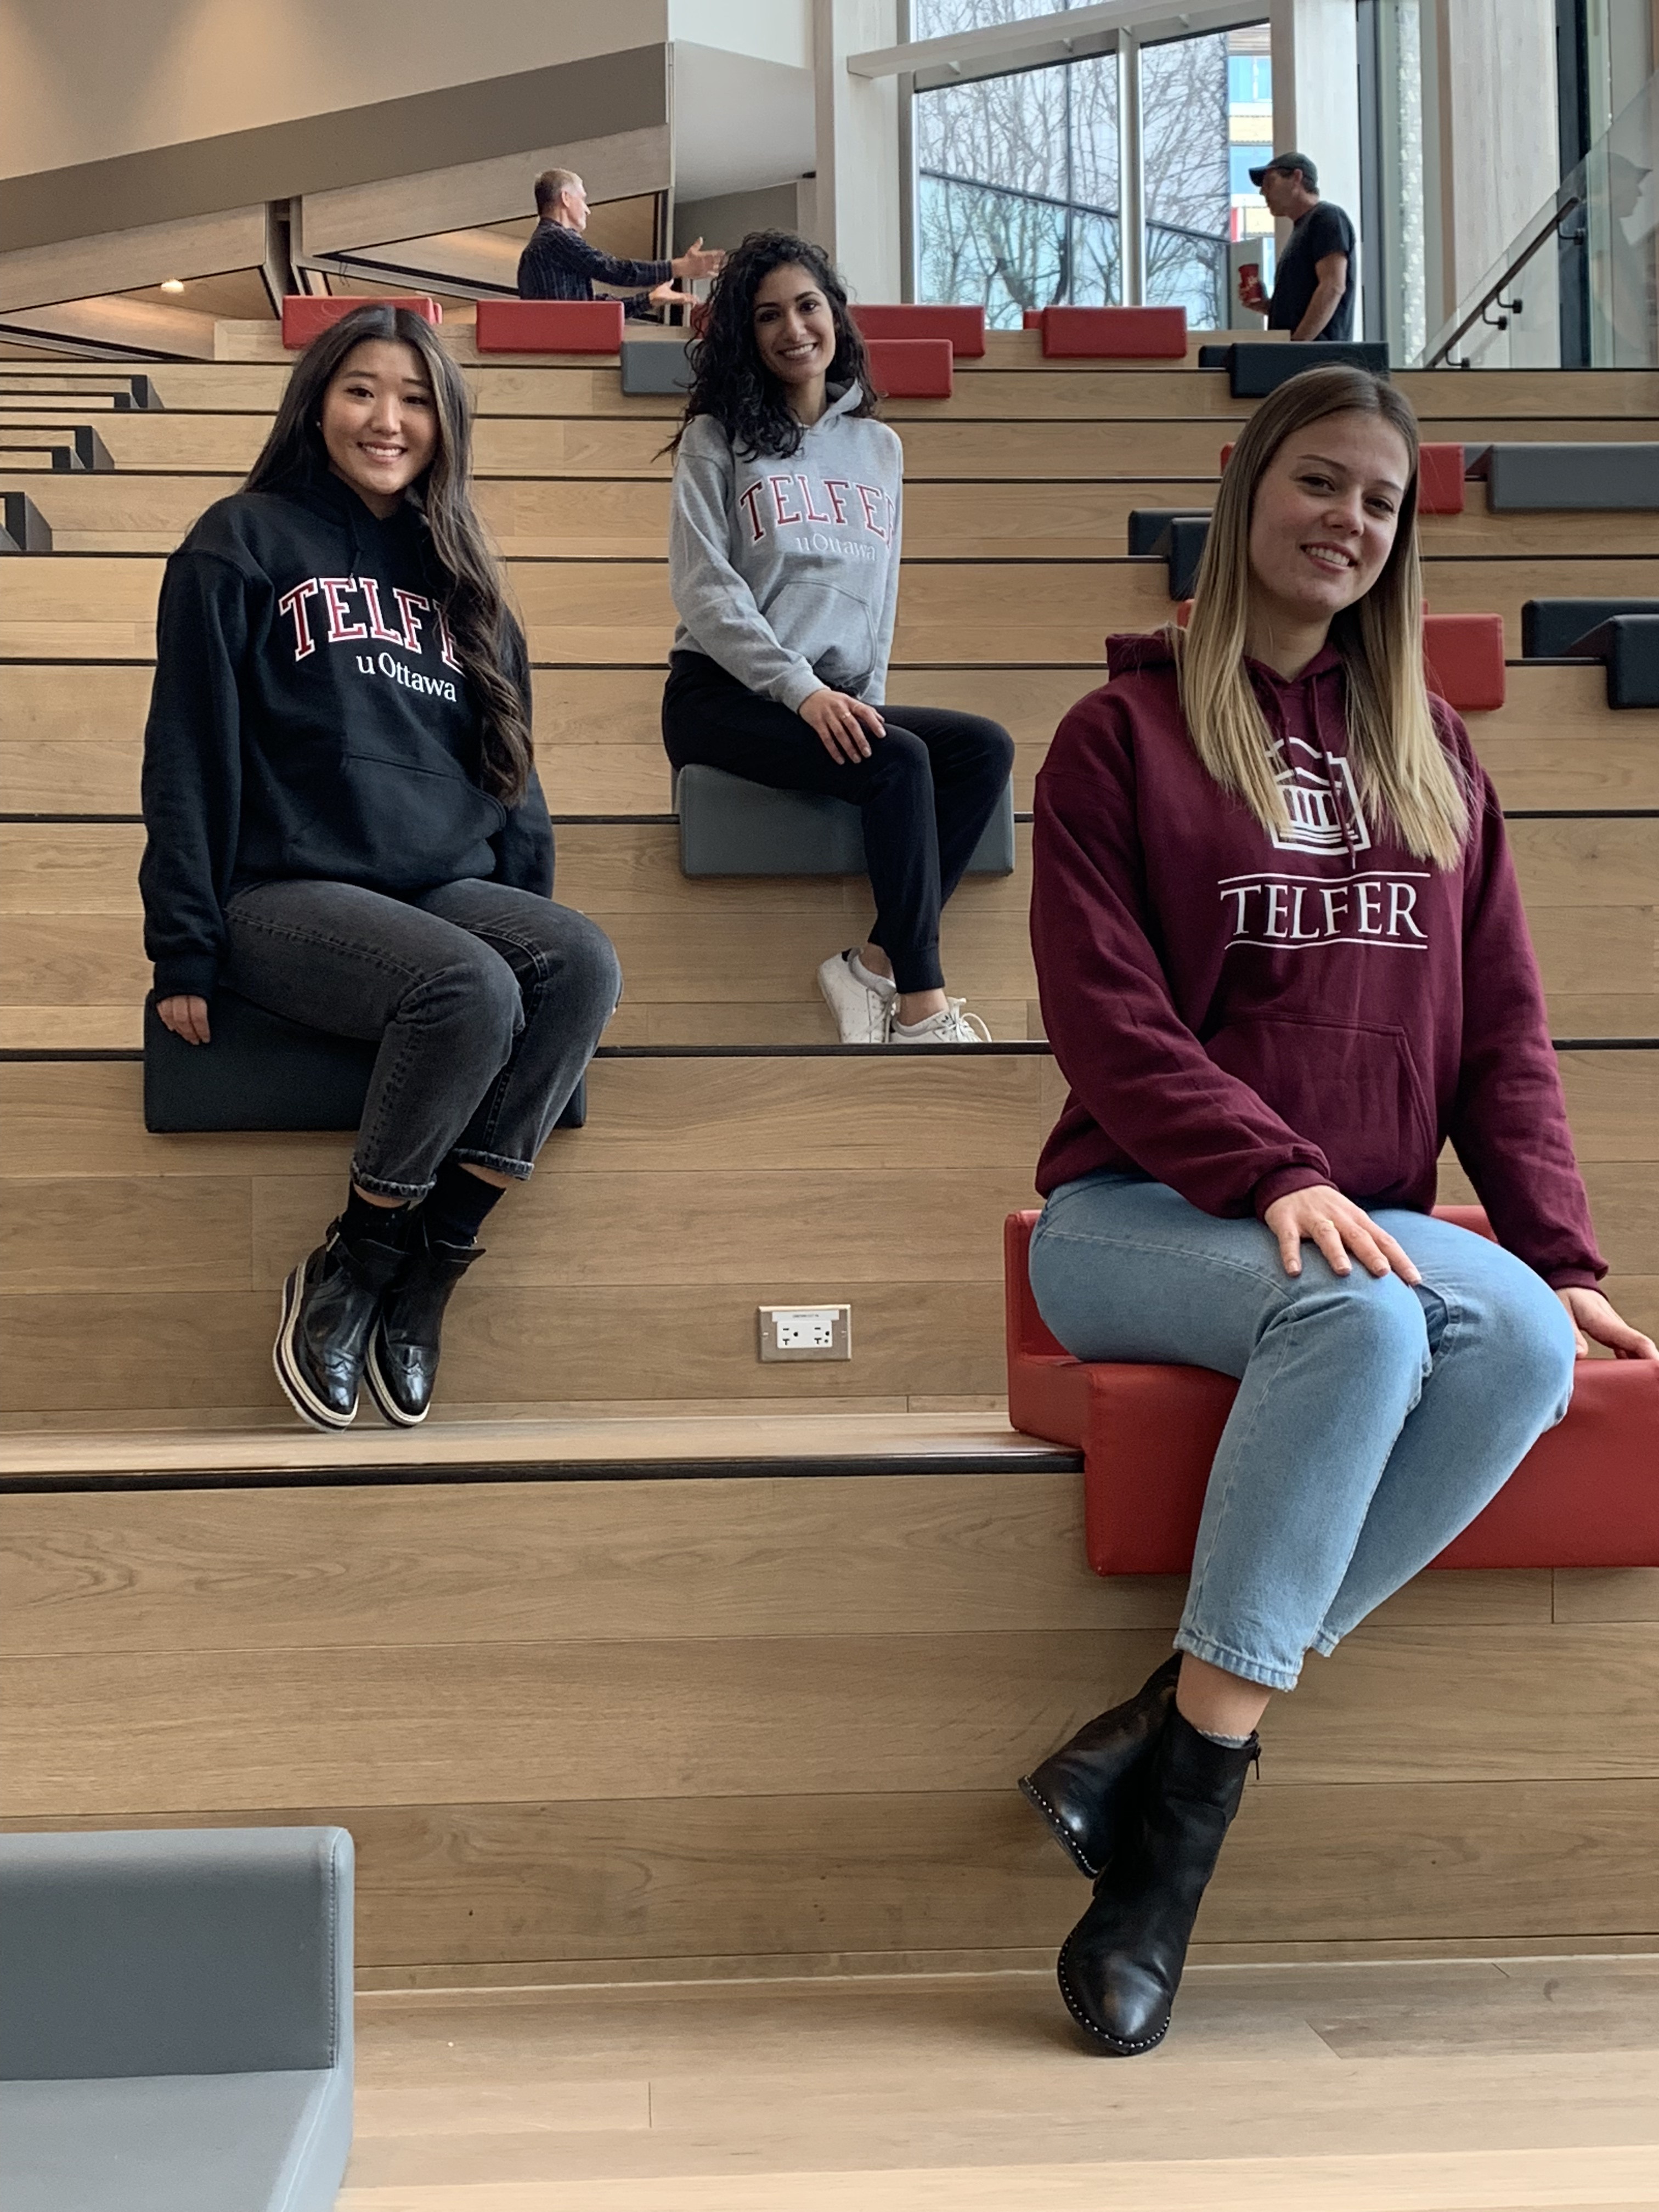 three Telfer students sitting on stairs smiling, wearing Telfer apparel